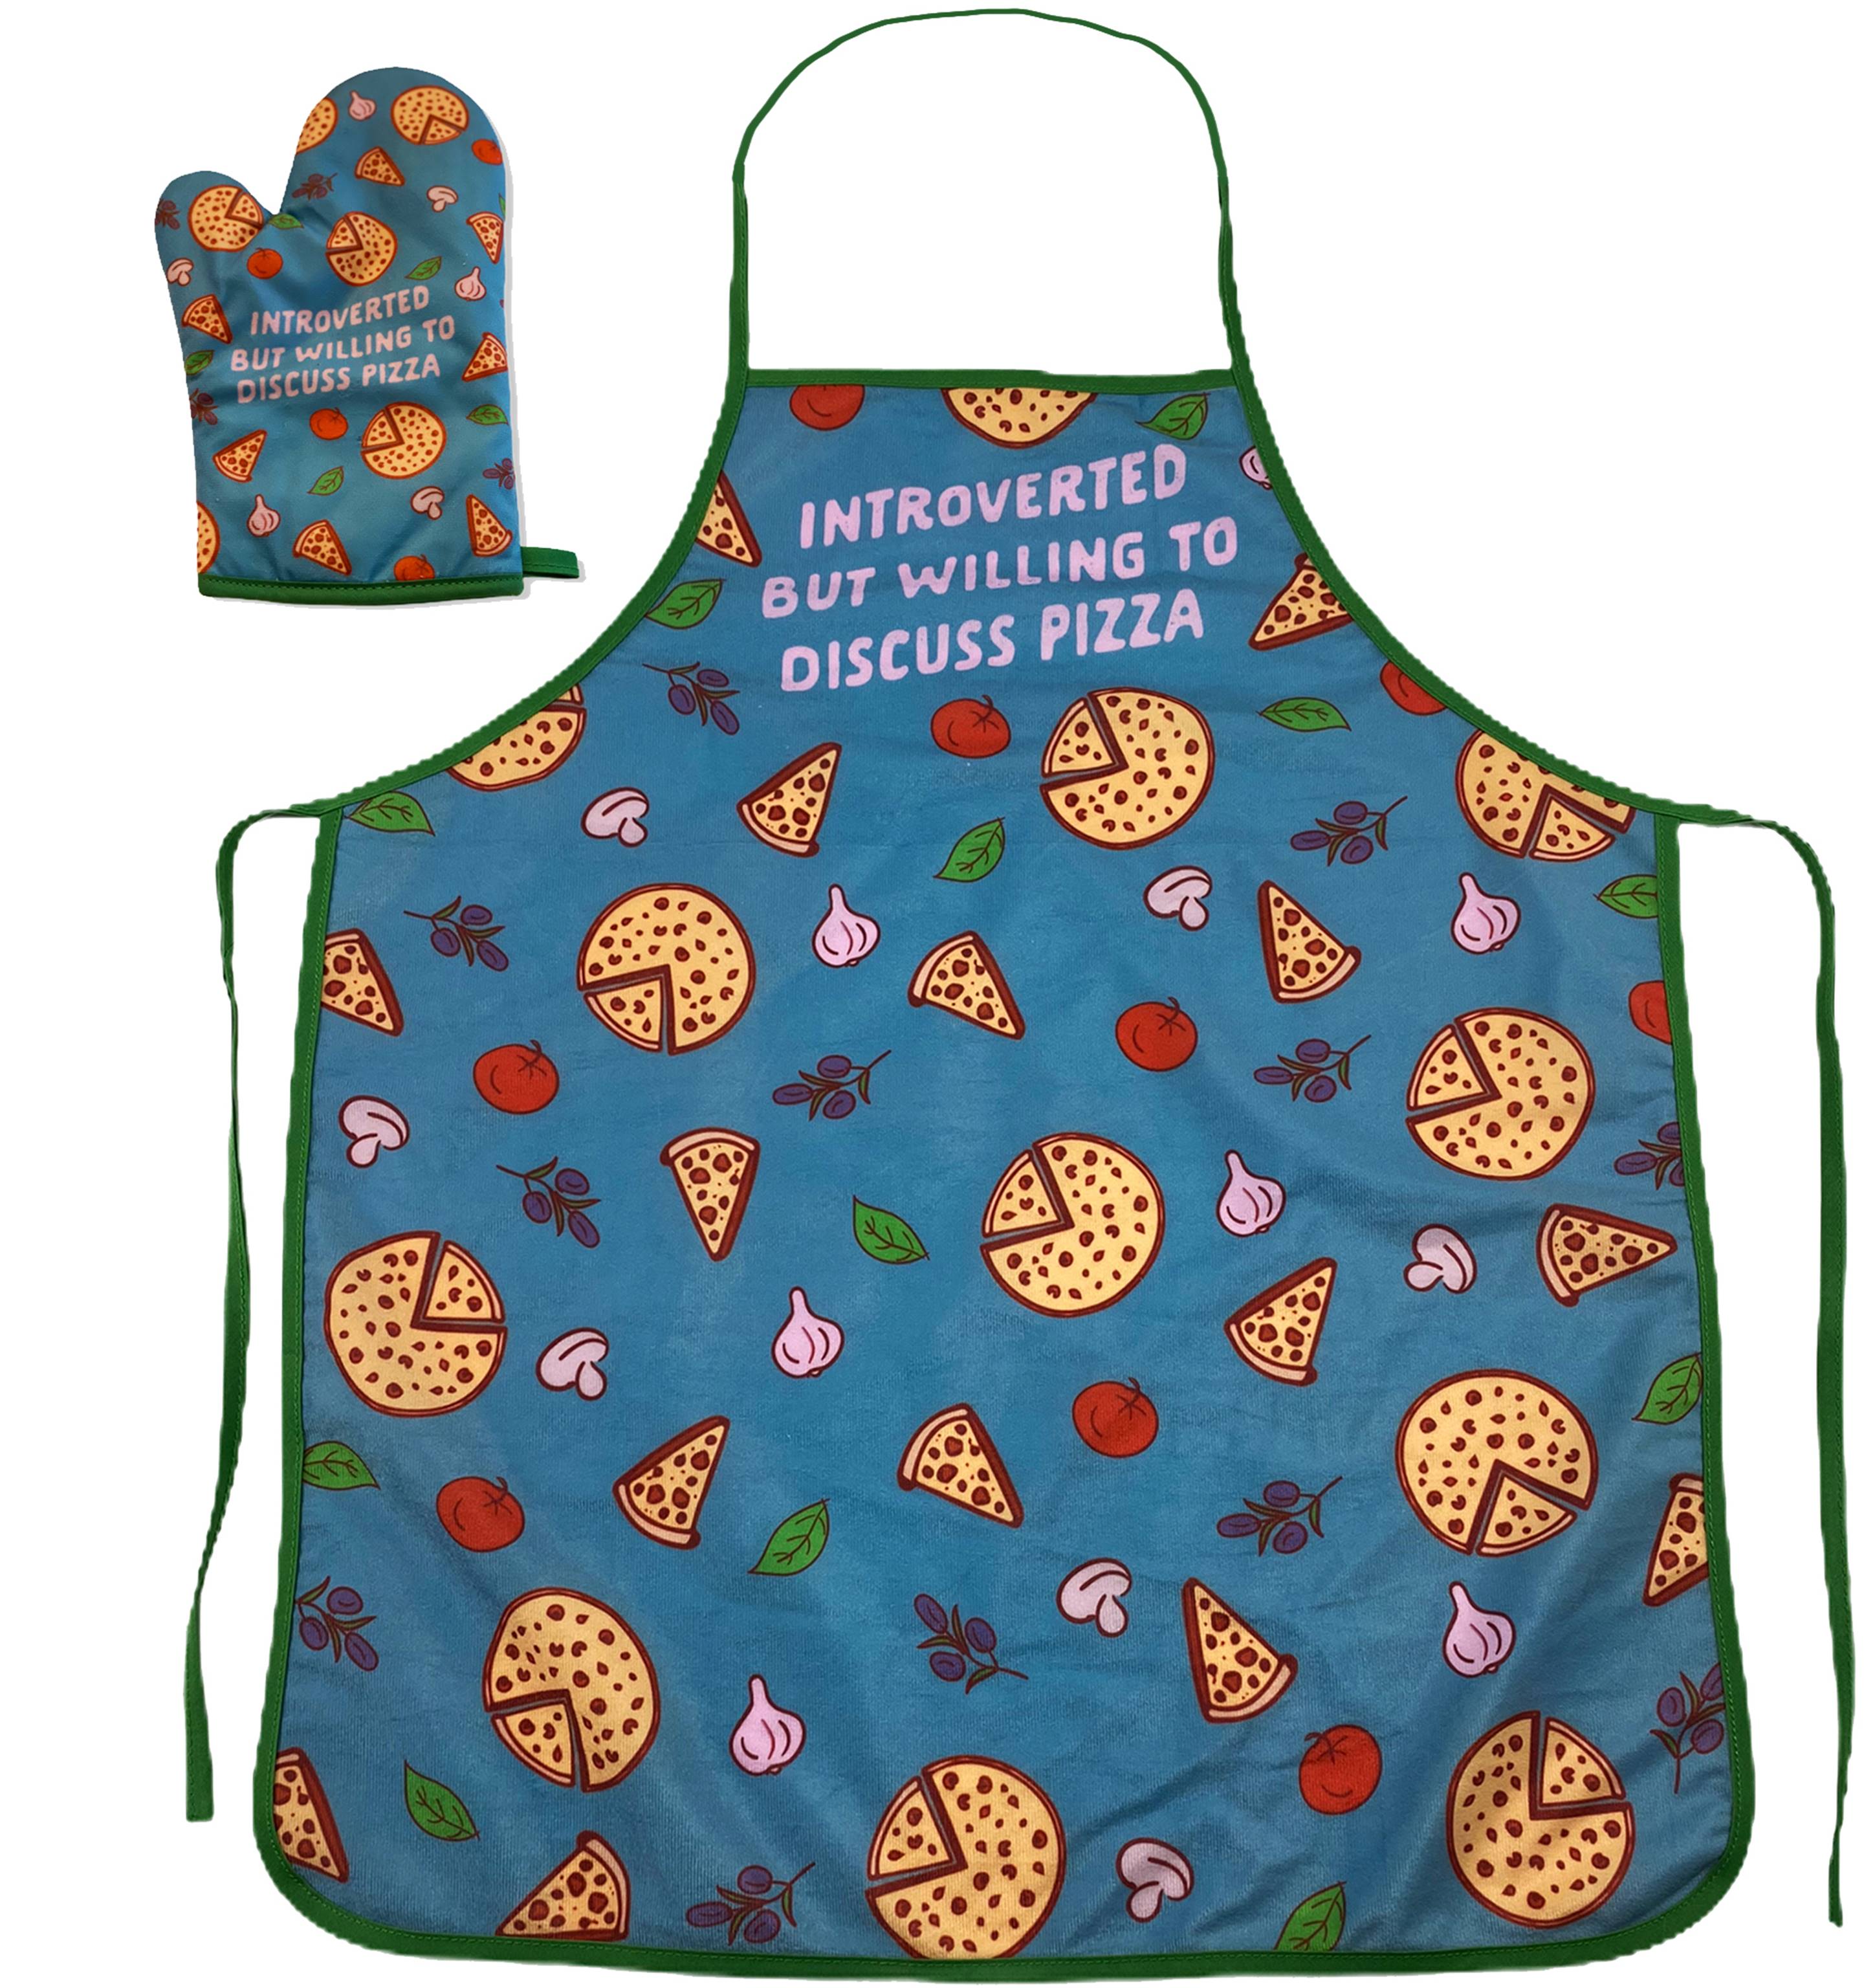 Introverted But Willing To Discuss Pizza Funny Baking Cooking Graphic Kitchen Accessories - image 1 of 8